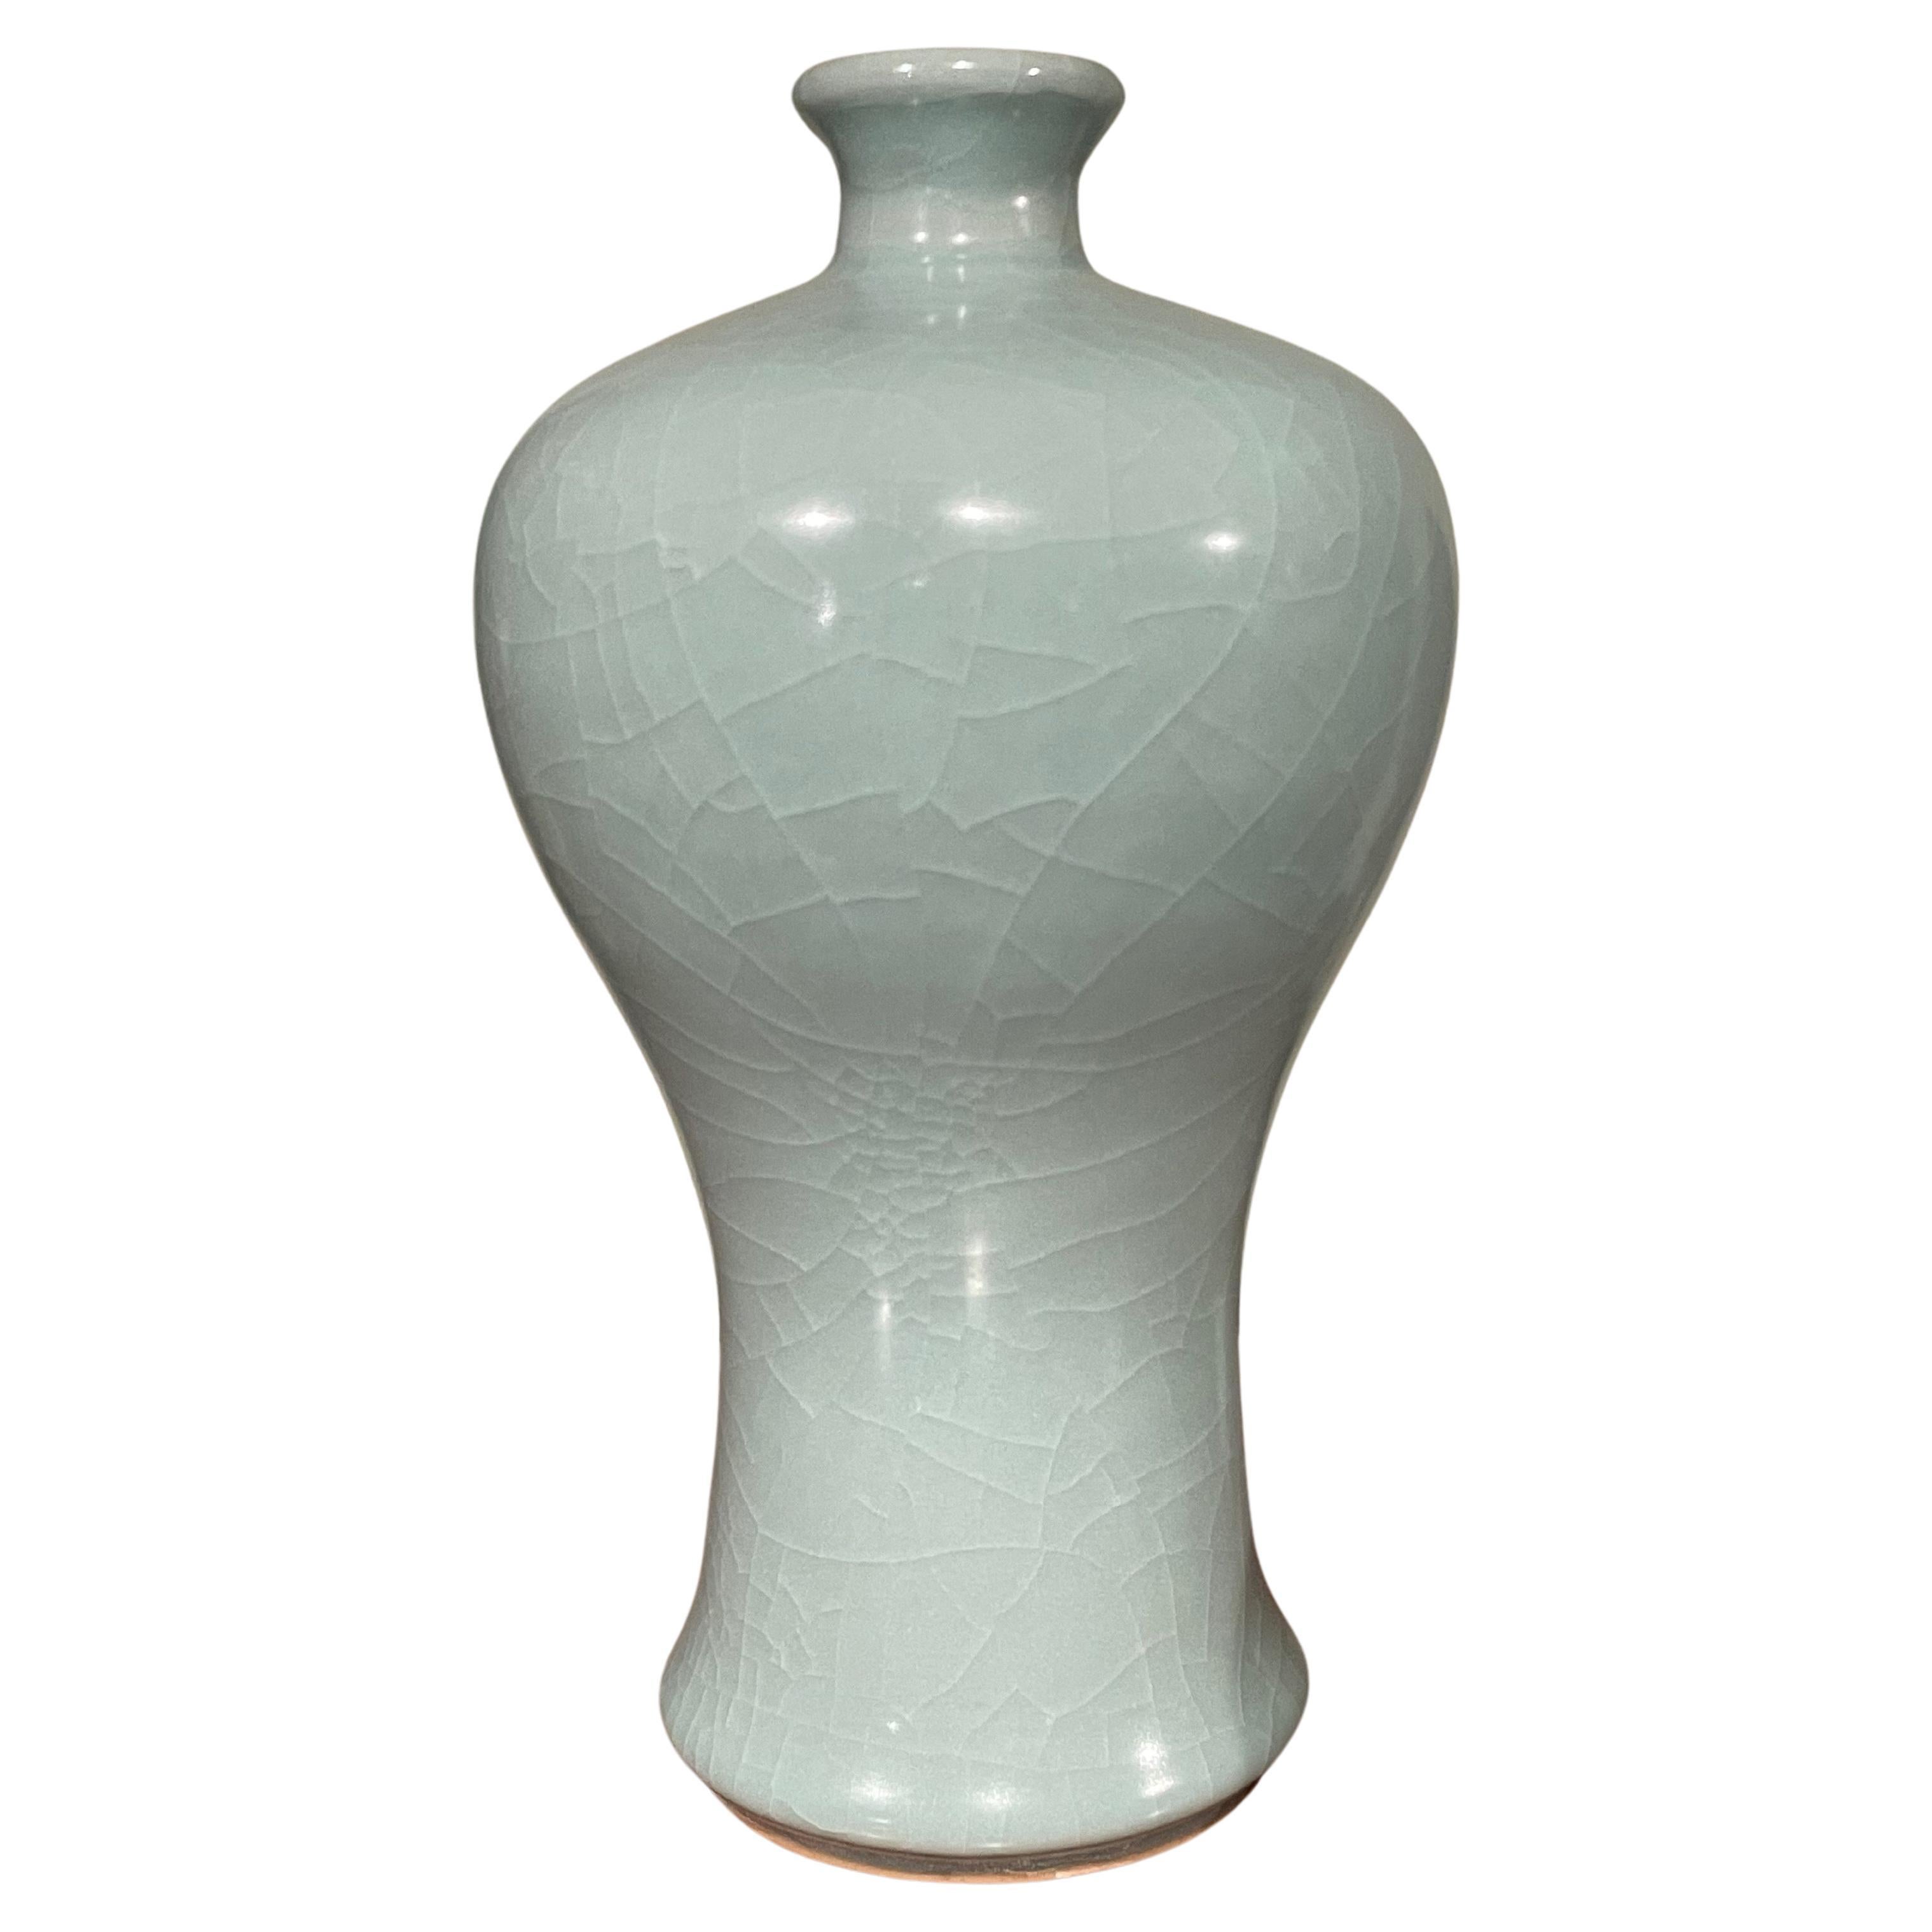 Pale Turquoise Curve Shape With Small Spout Vase, China, Contemporary